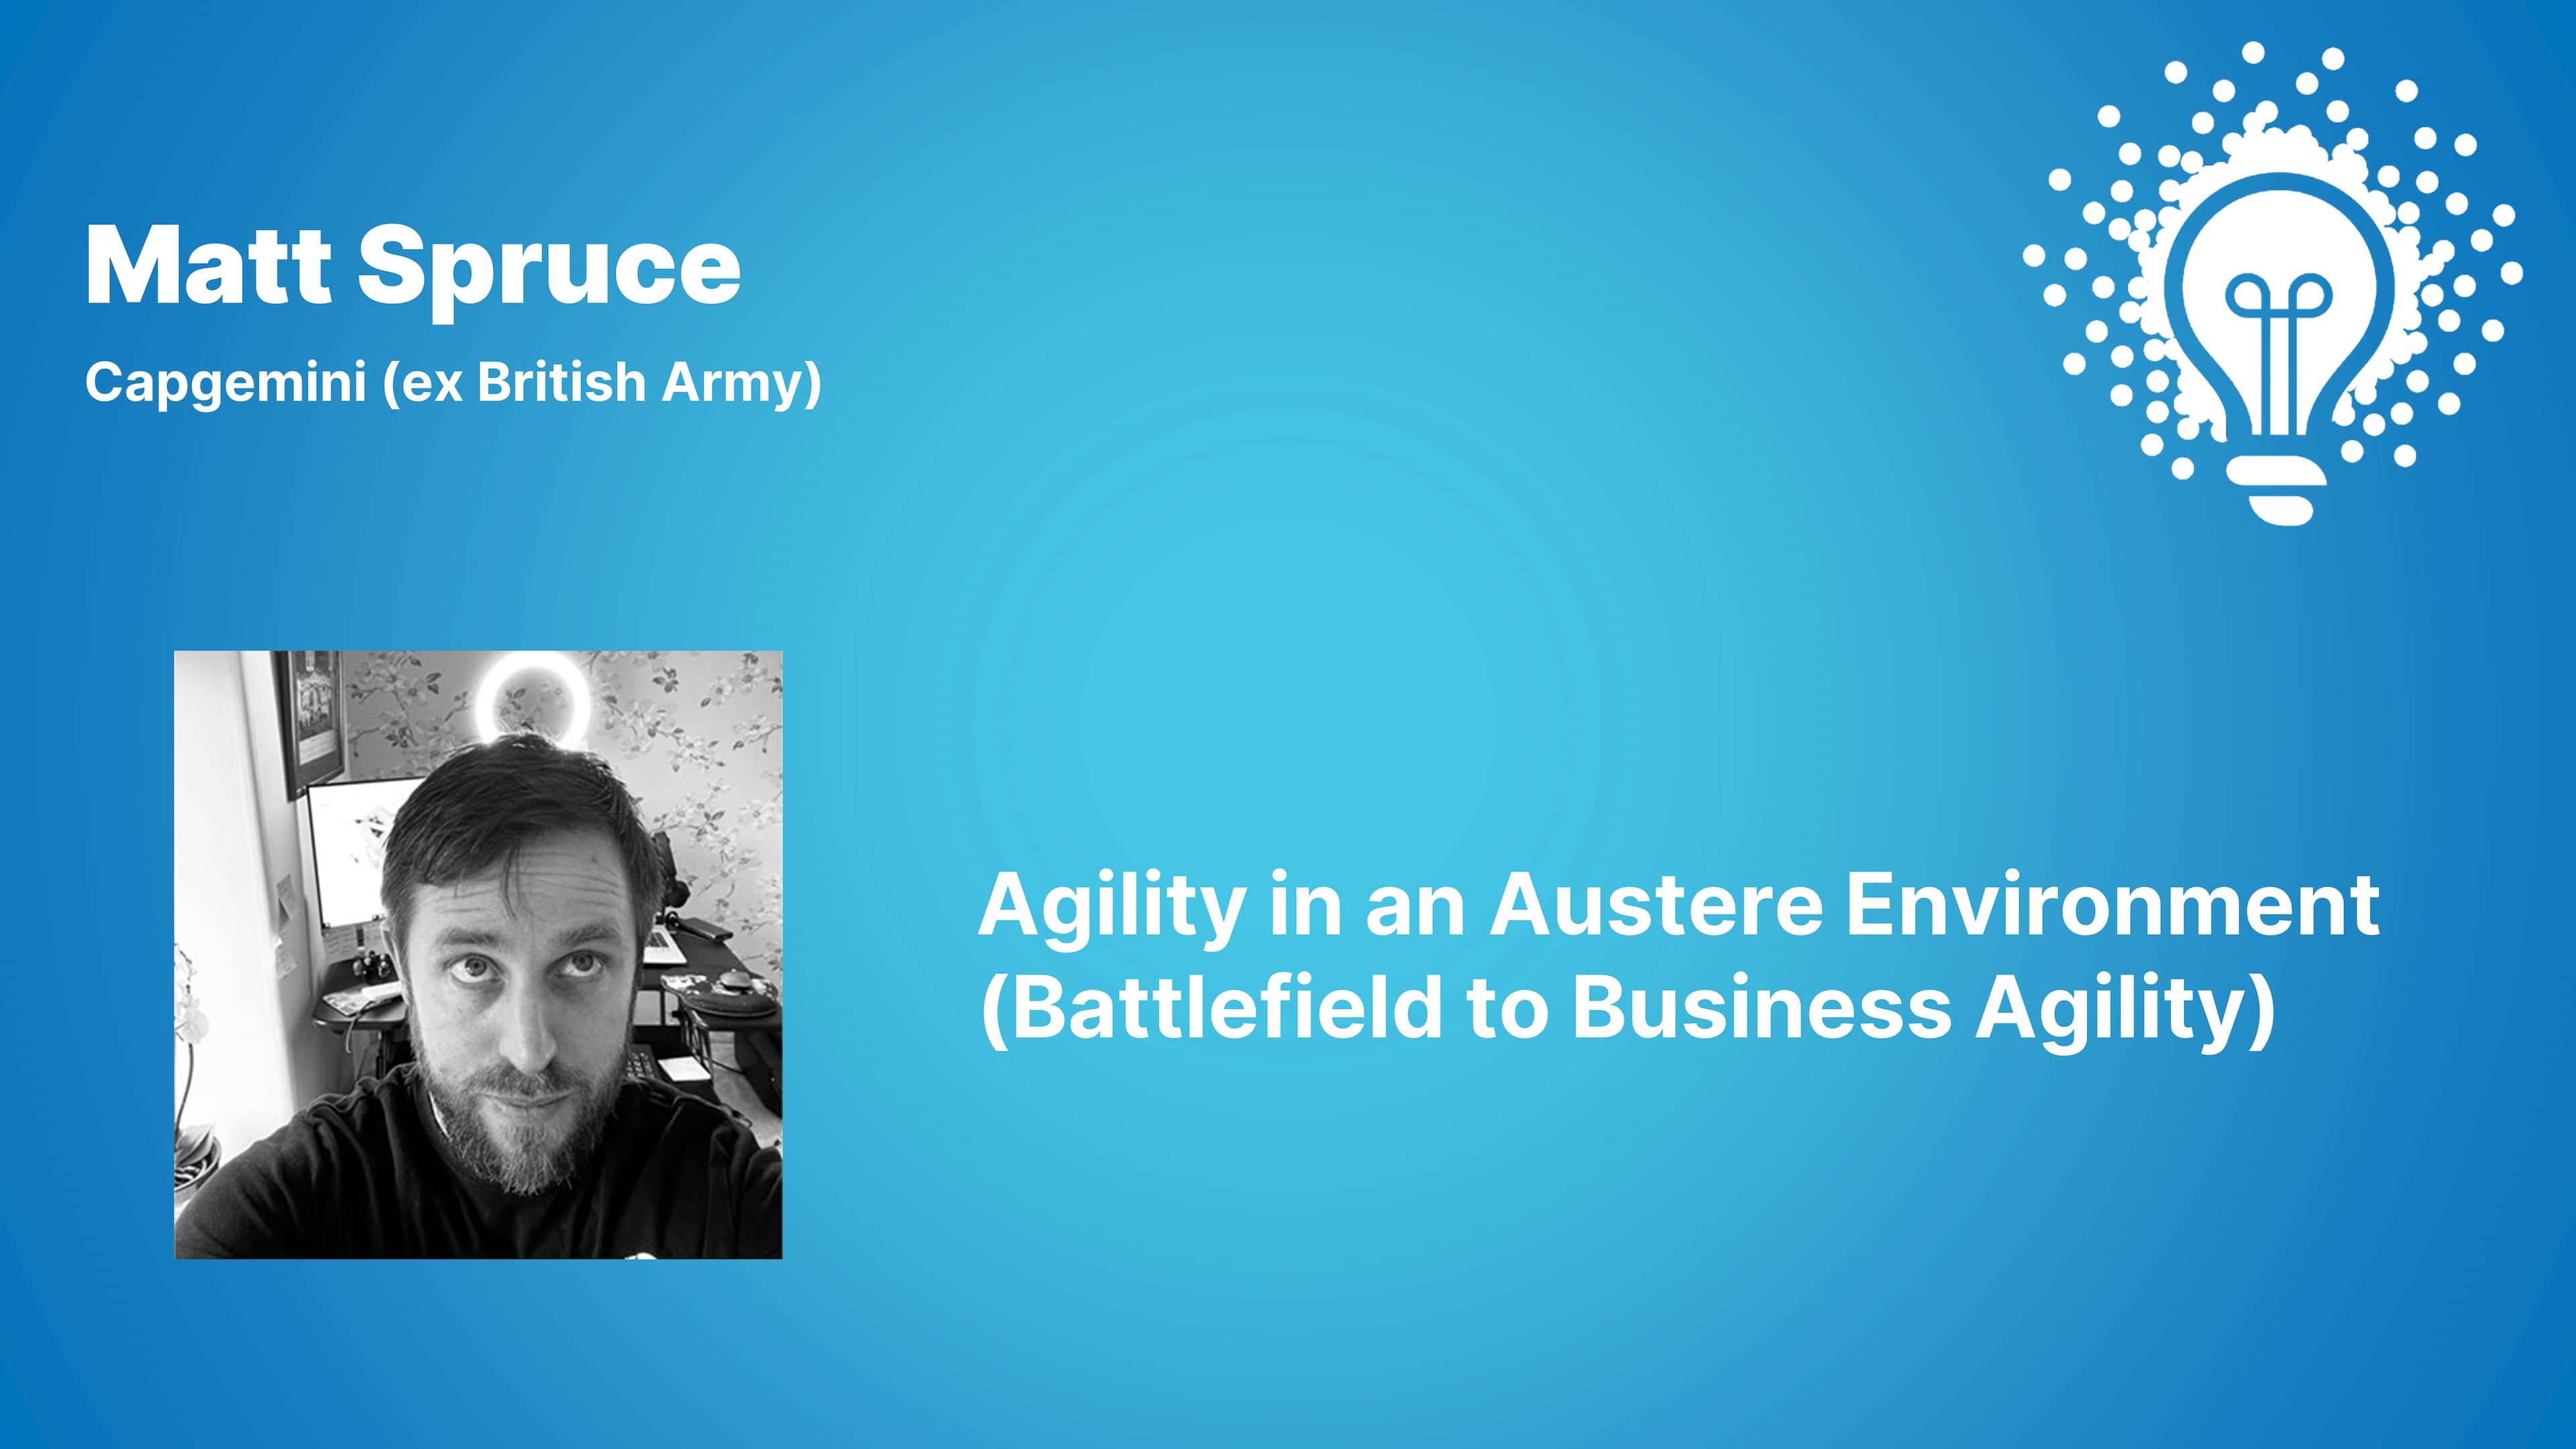 Agility in an Austere Environment